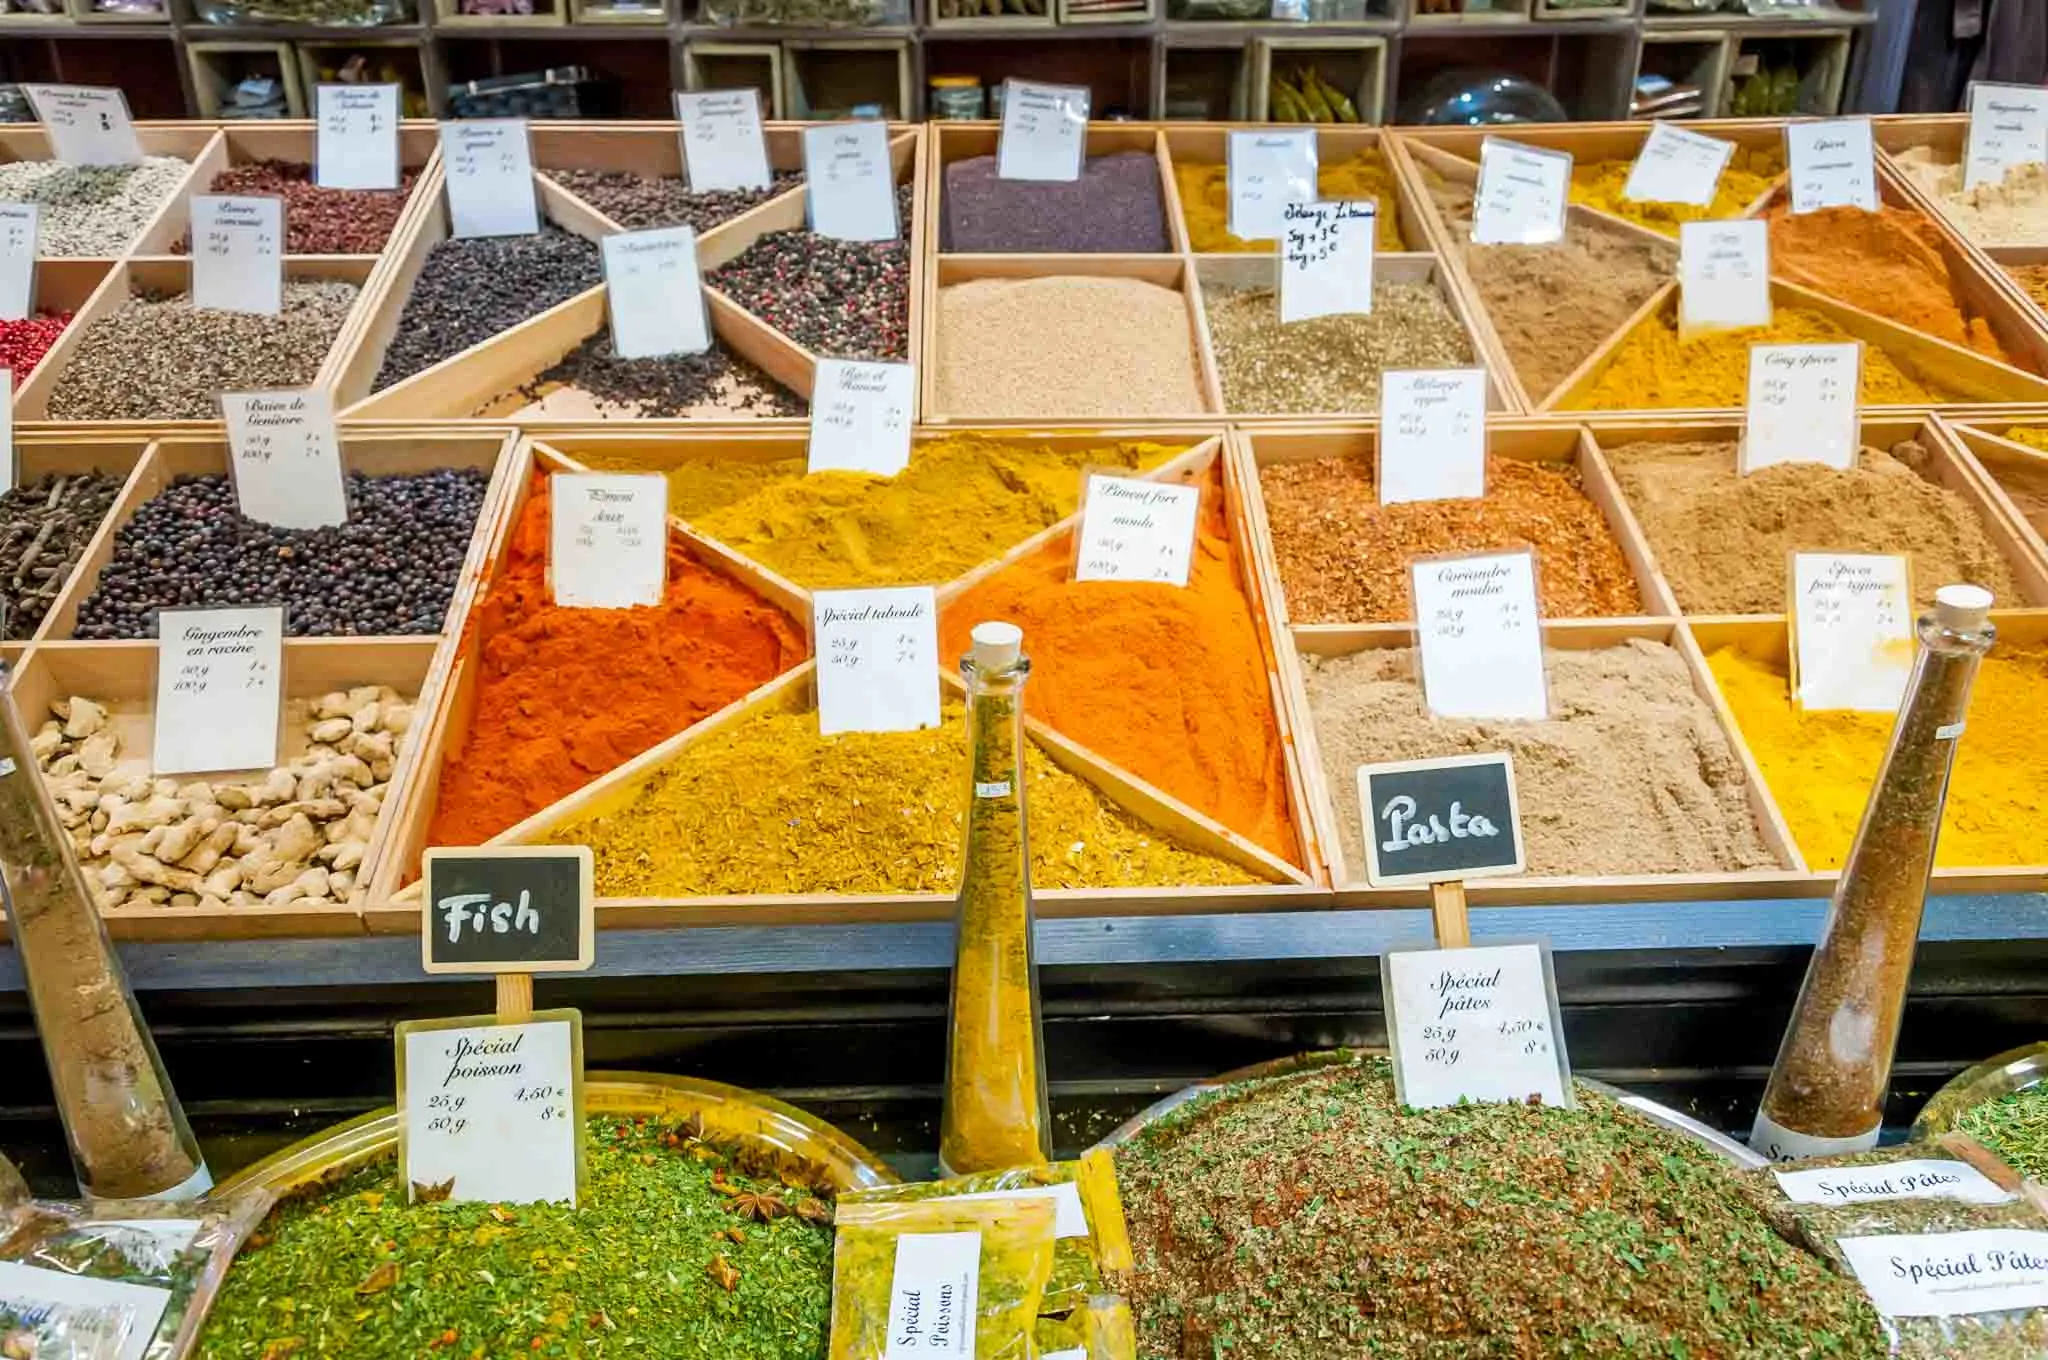 Spices for sale at the Les Halles market